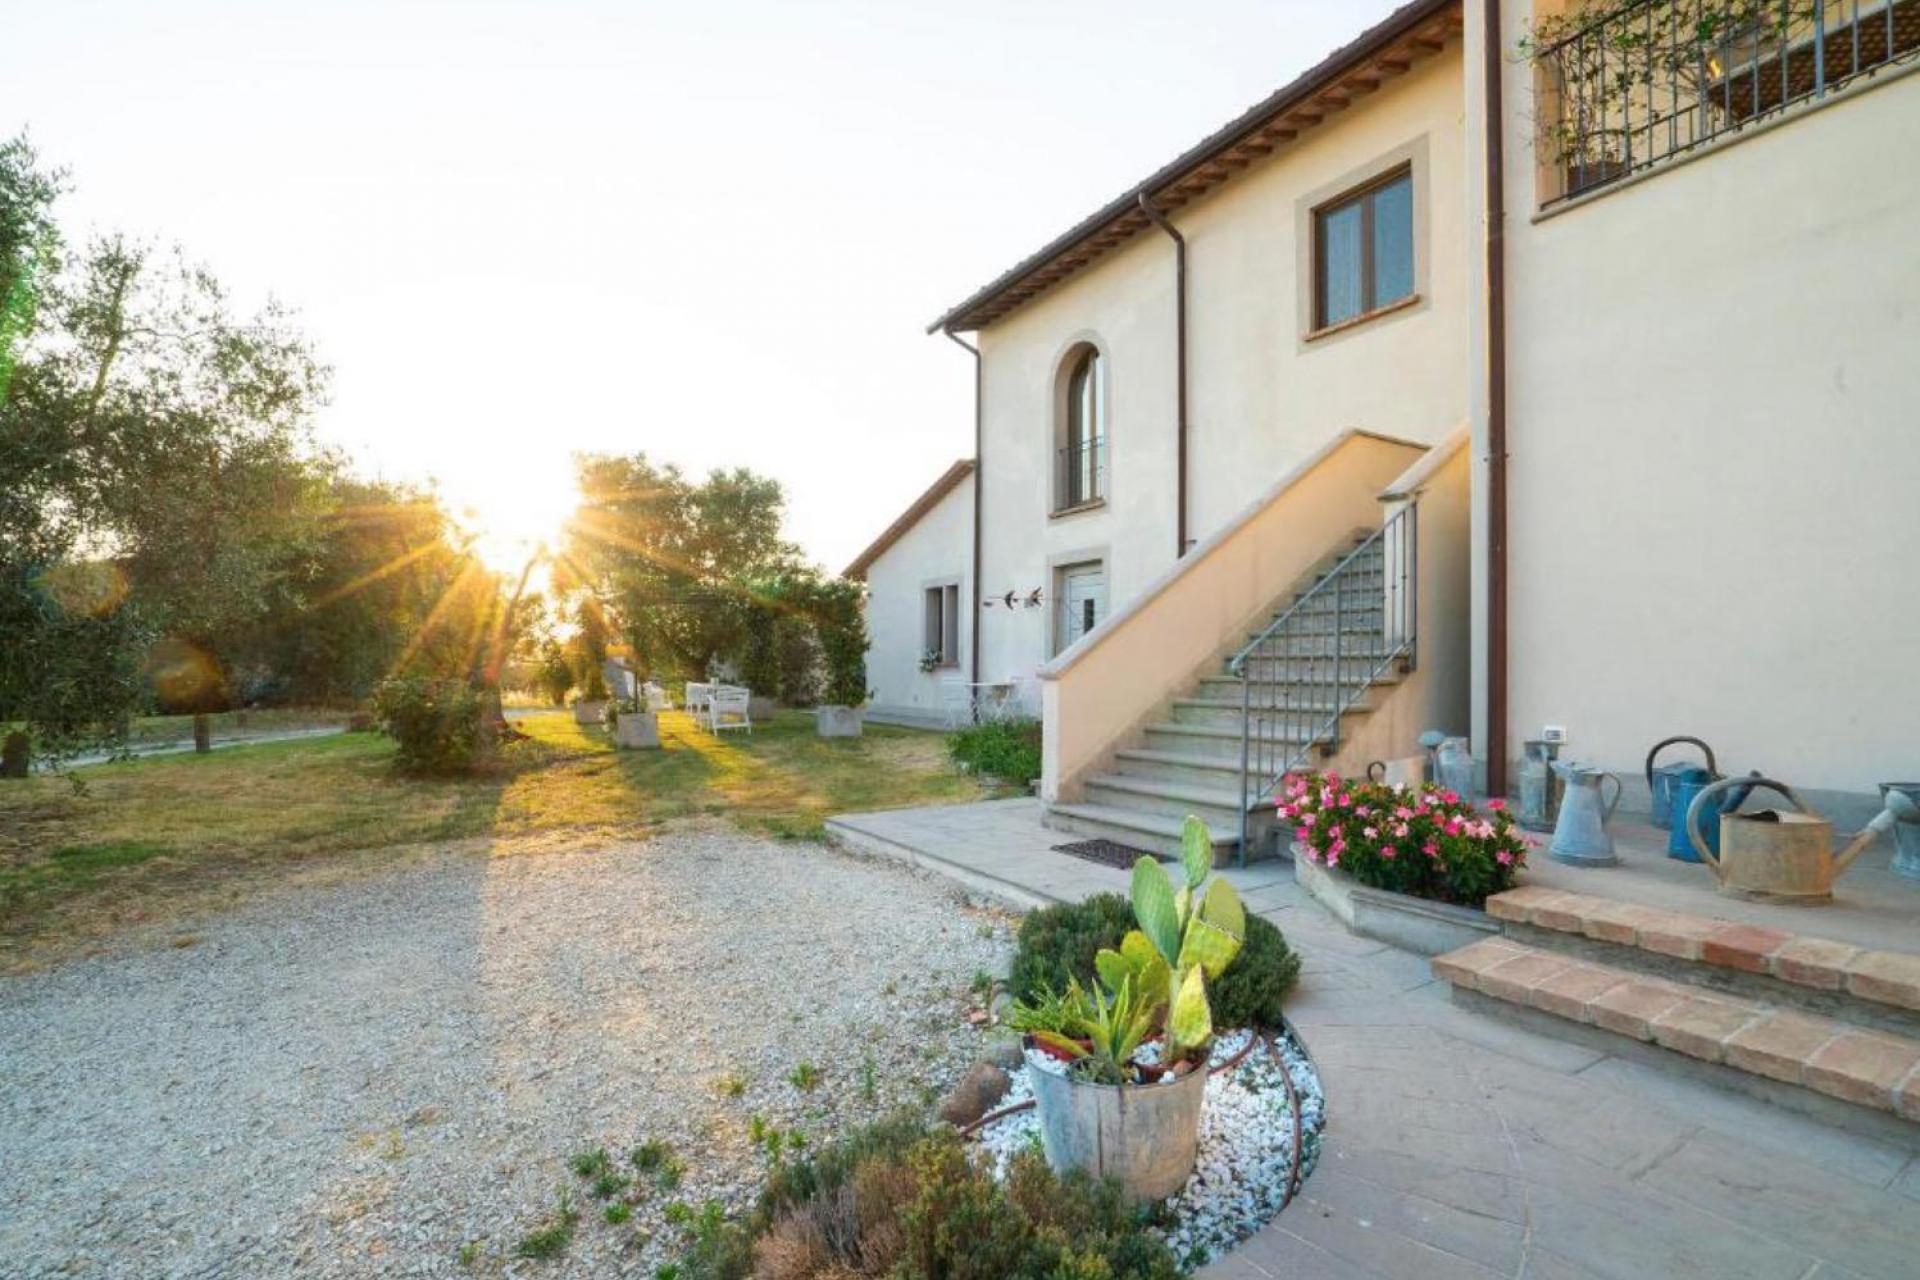 Agriturismo Tuscany Centrally located agriturismo for exploring Tuscany